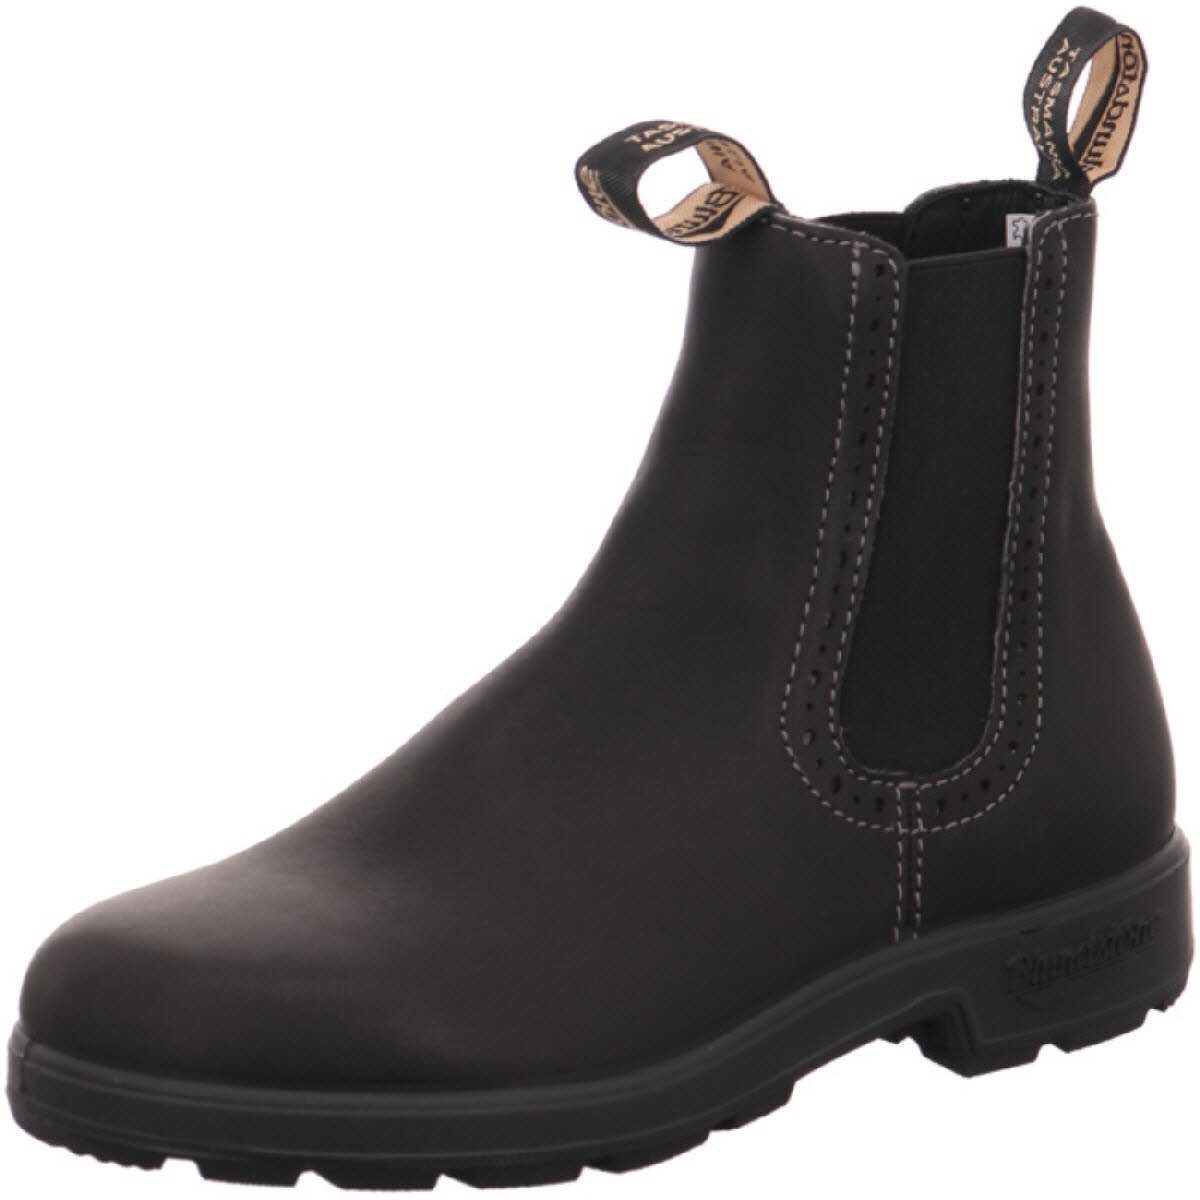 Blundstone 1448 Ankleboots